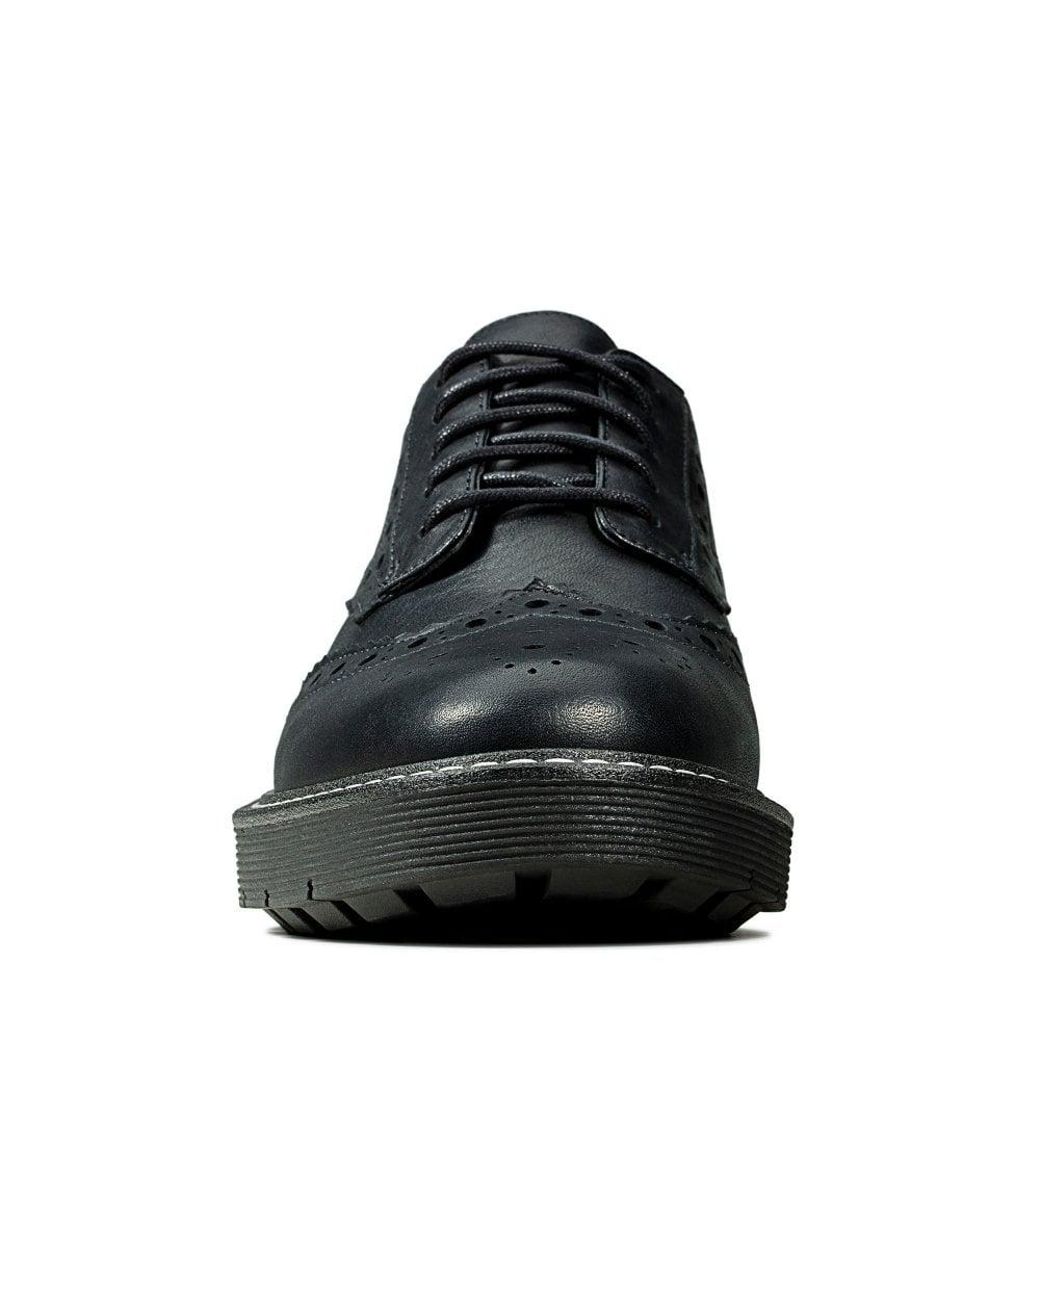 Clarks Witcombe Leather Brogues in Black | Lyst UK